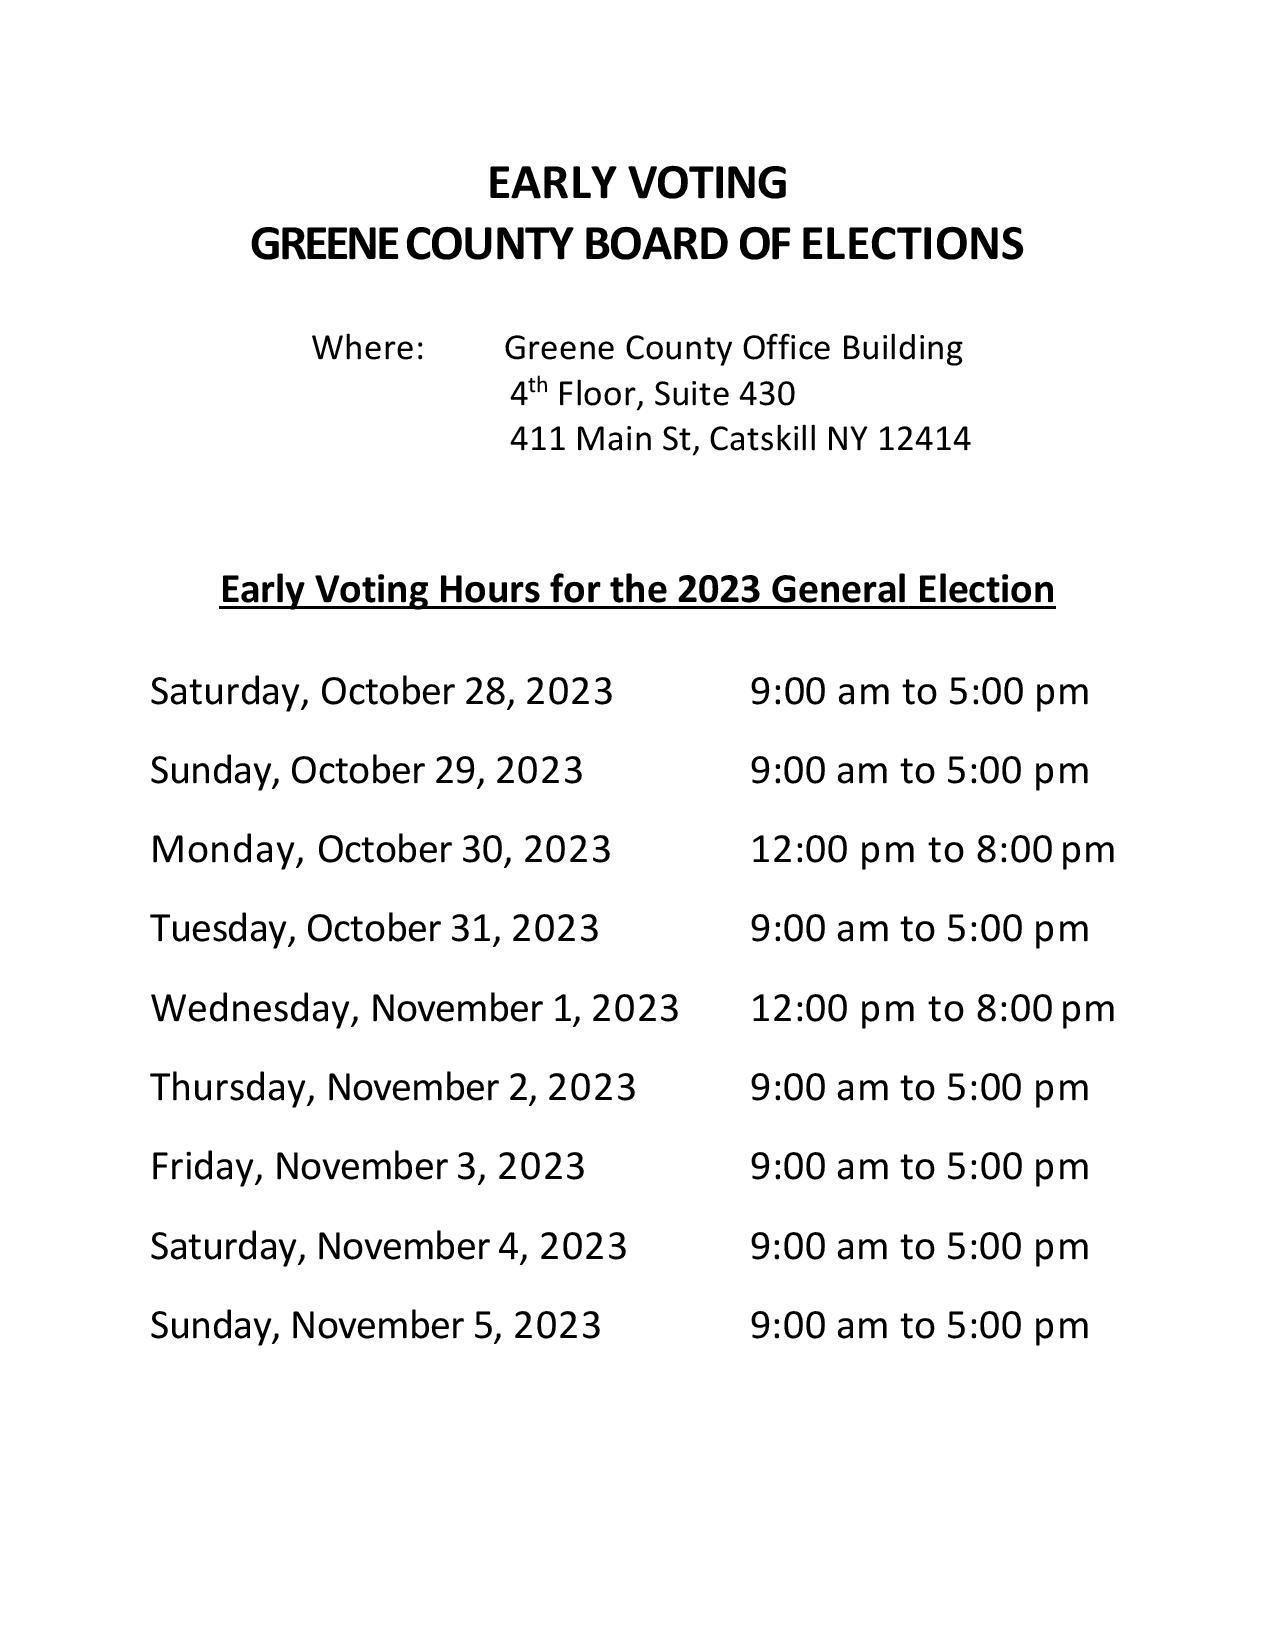 EARLY VOTING
GREENE COUNTY BOARD OF ELECTIONS
Where: Greene County Office Building
4th Floor, Suite 430
411 Main St., Catskill, NY 12414

EARLY VOTING HOURS FOR THE 2023 GENERAL ELECTION
Saturday, October 28, 2023        9:00 am to 5:00 pm

Sunday, October 29, 2023        9:00 am to 5:00 pm

Monday, October 30, 2023        12:00 pm to 8:00 pm

Tuesday, October 31, 2023         9:00 am to 5:00 pm

Wednesday, November 1, 2023    12:00 pm to 8 pm

Thursday, November 2, 2023      9:00 am to 5:00 pm

Friday, November 3, 2023          9:00 am to 5:00 pm

Saturday, November 4, 2023     9:00 am to 5:00 pm

Sunday, November 5, 2023       9:00 am to 5:00 pm